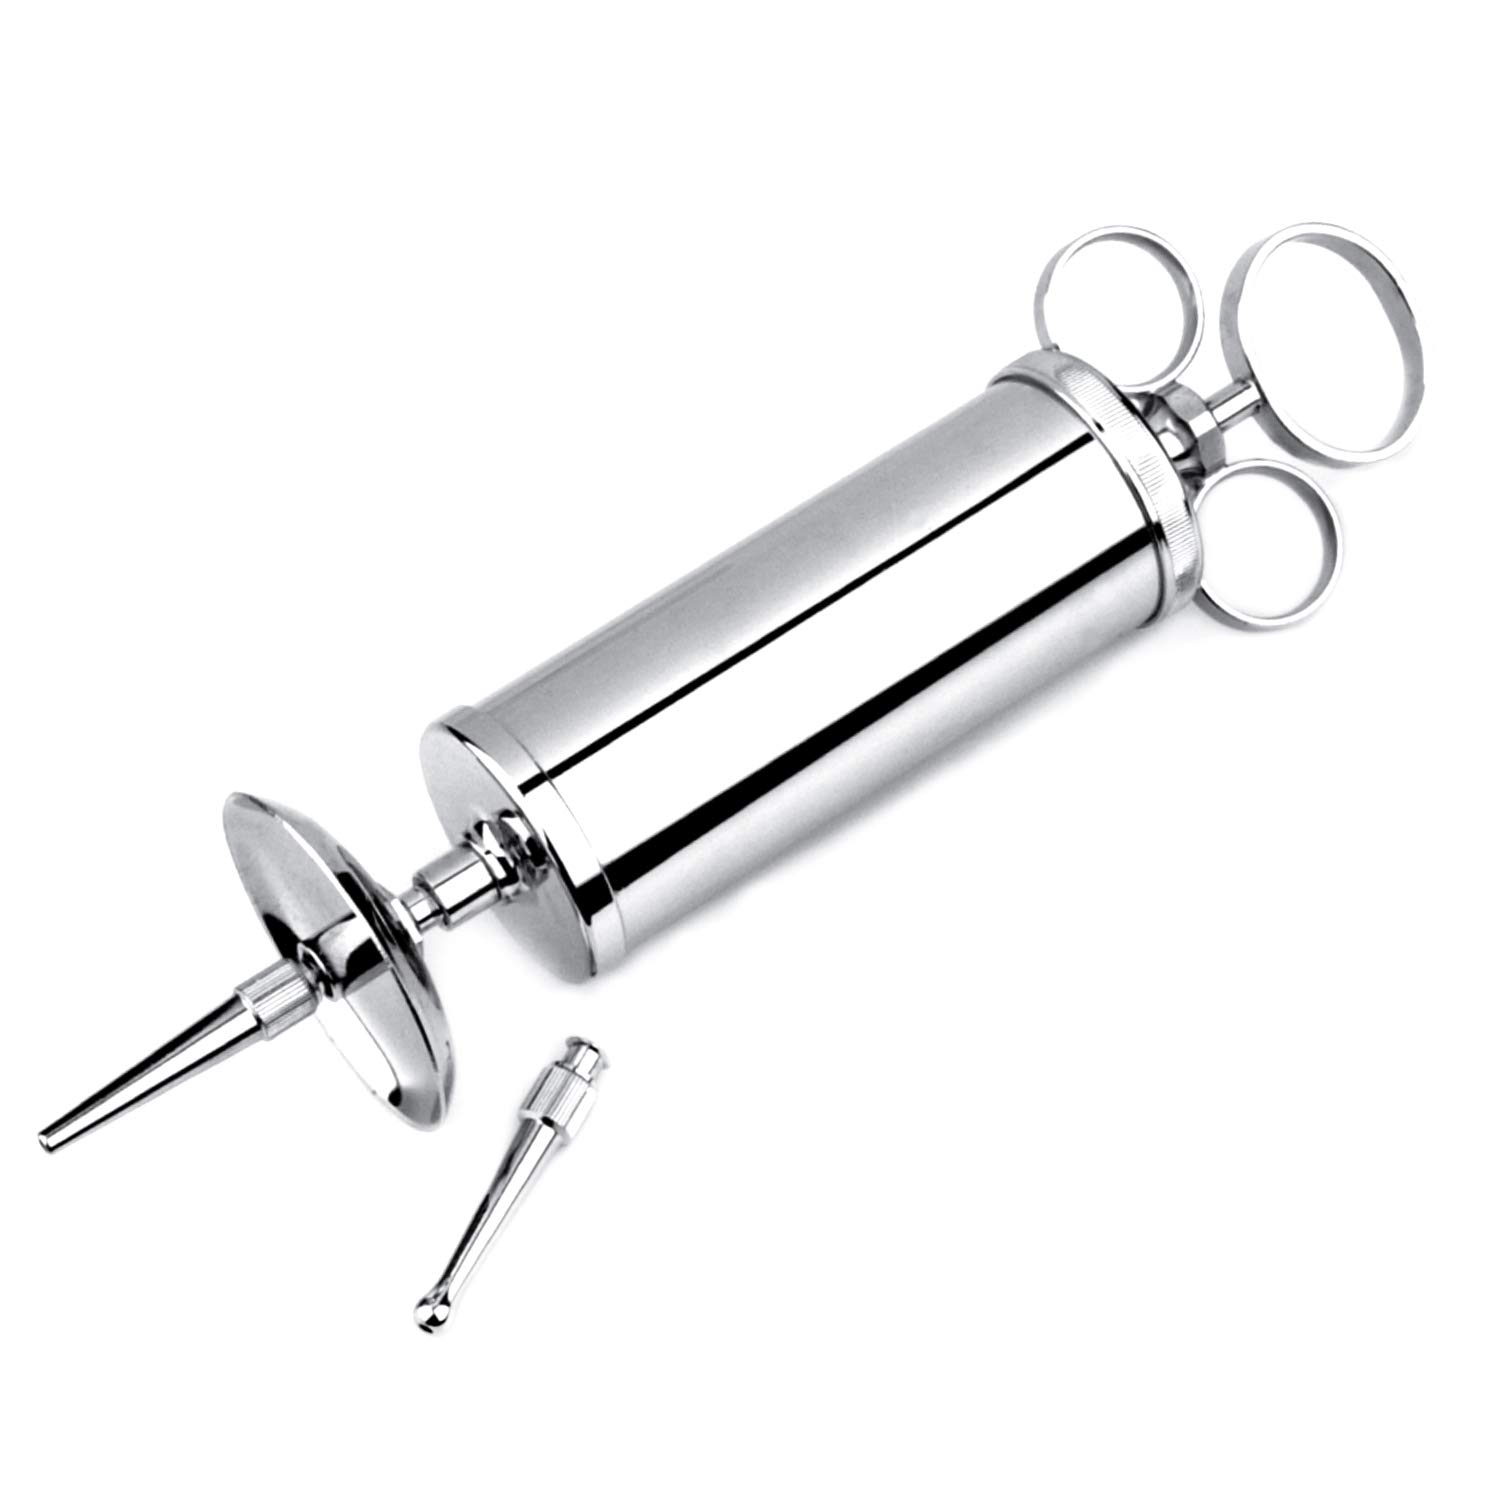 Ear Wax Removal Syringe 4 OZ - Brass with Chrome Finish Ideal for Household, EMT, Firefighter, Police, Medical Student, School and Hobby